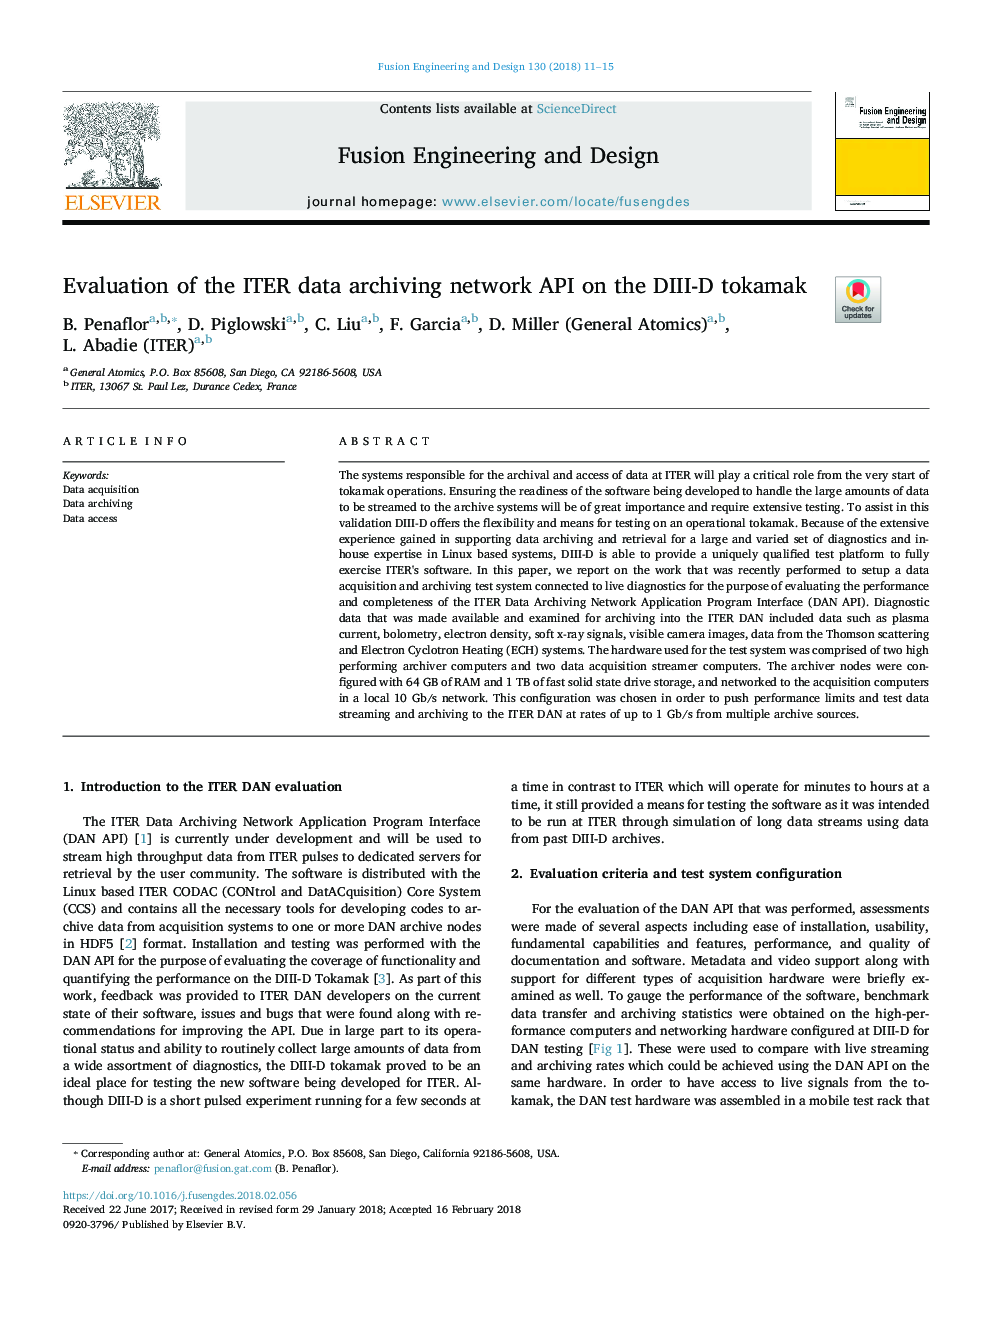 Evaluation of the ITER data archiving network API on the DIII-D tokamak